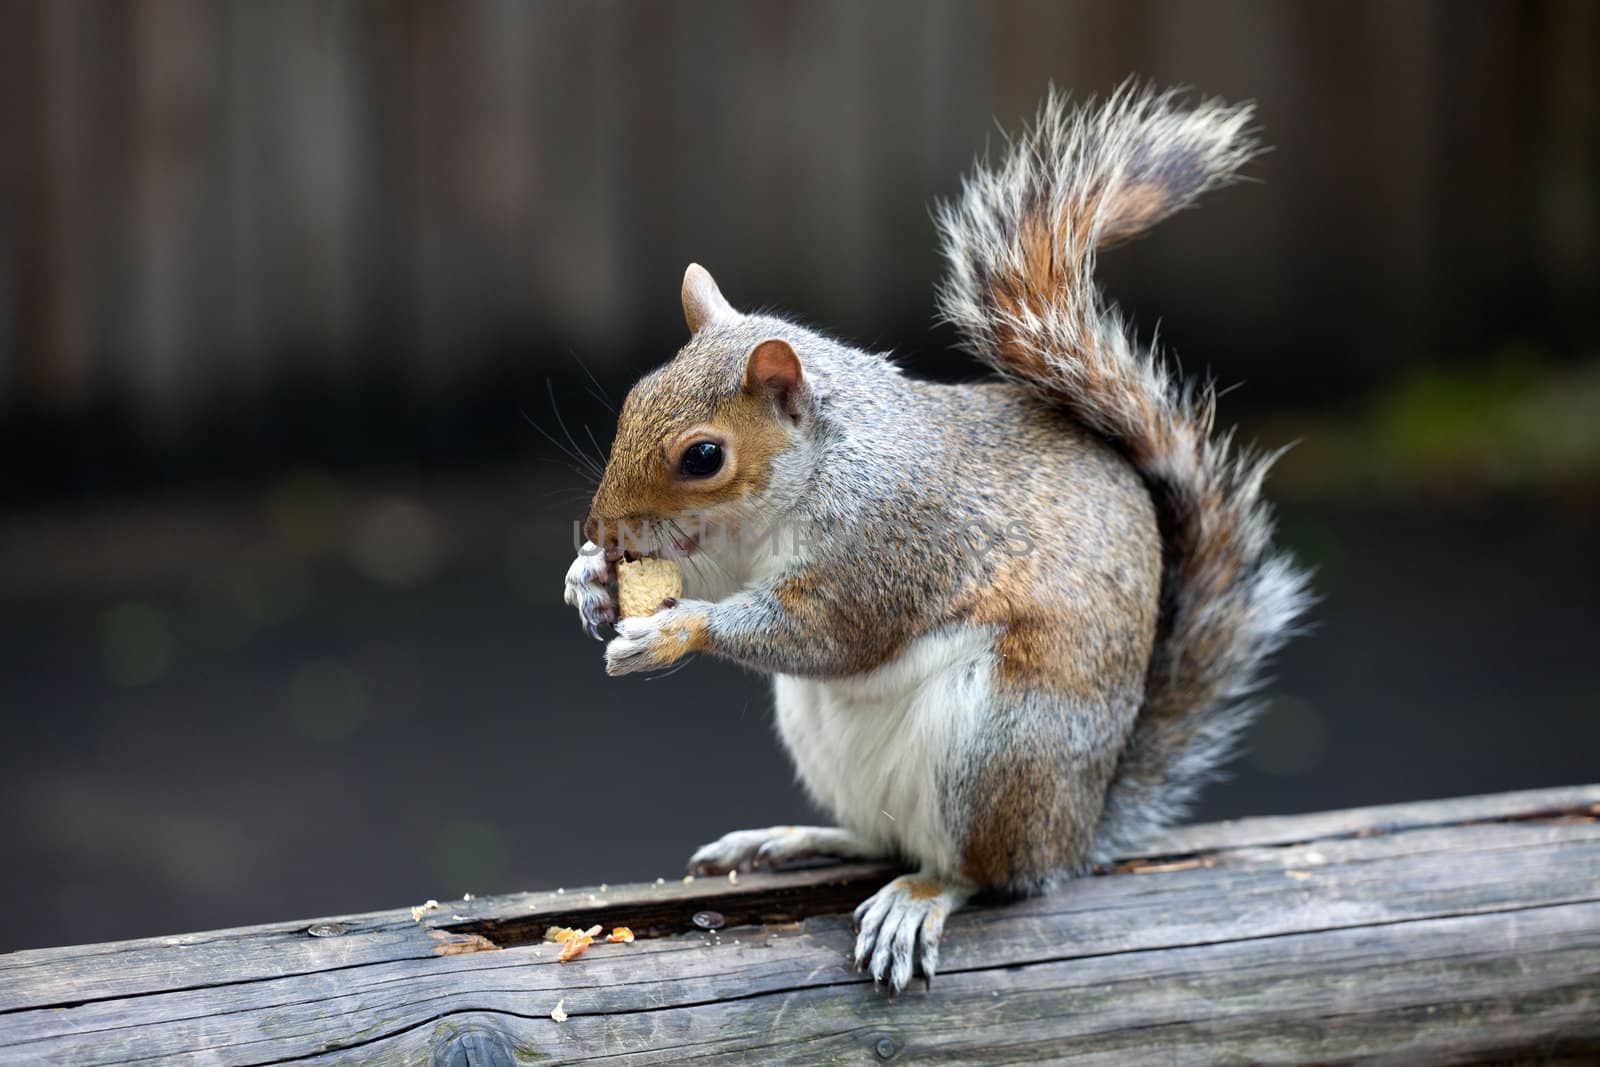 The grey squirrel eating nut in St. James's Park, London, UK